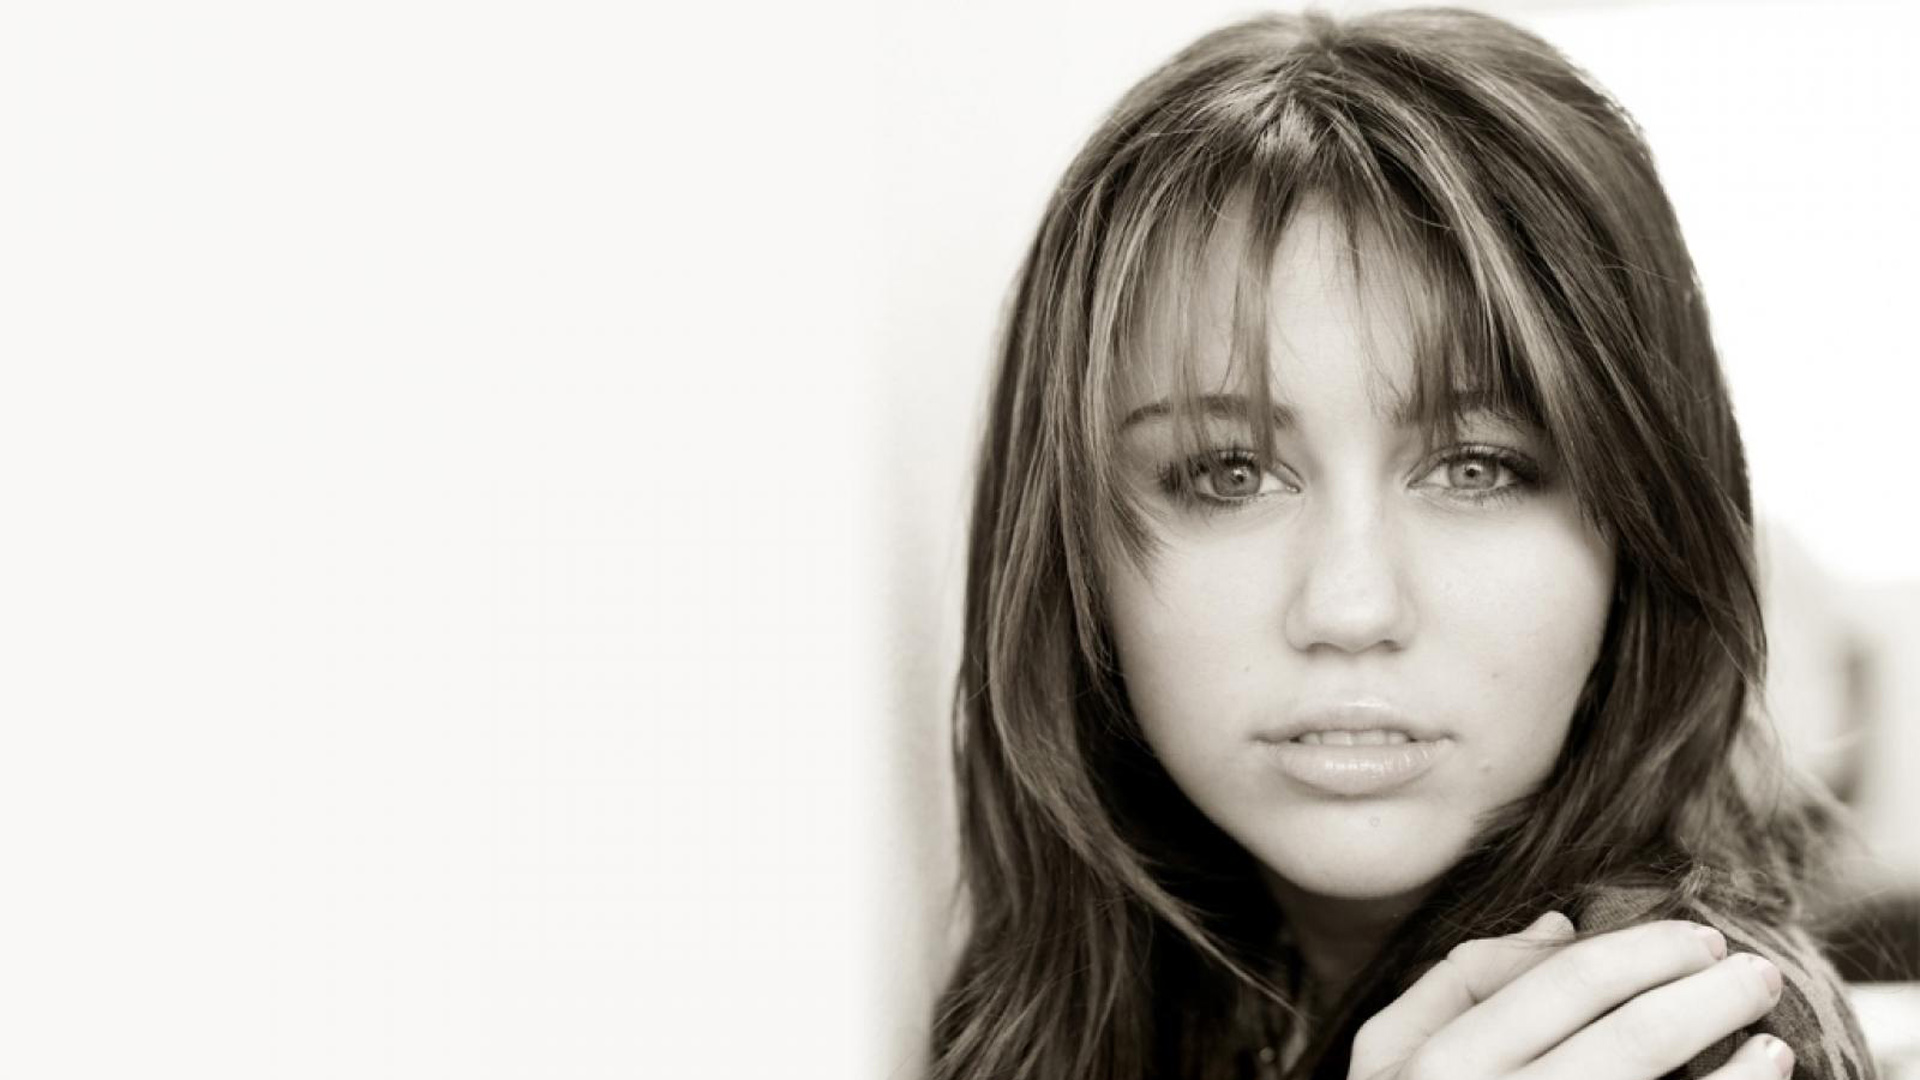 Gray Eyes Miley Cyrus On Side With White Wallpaper HD Miley Cyrus